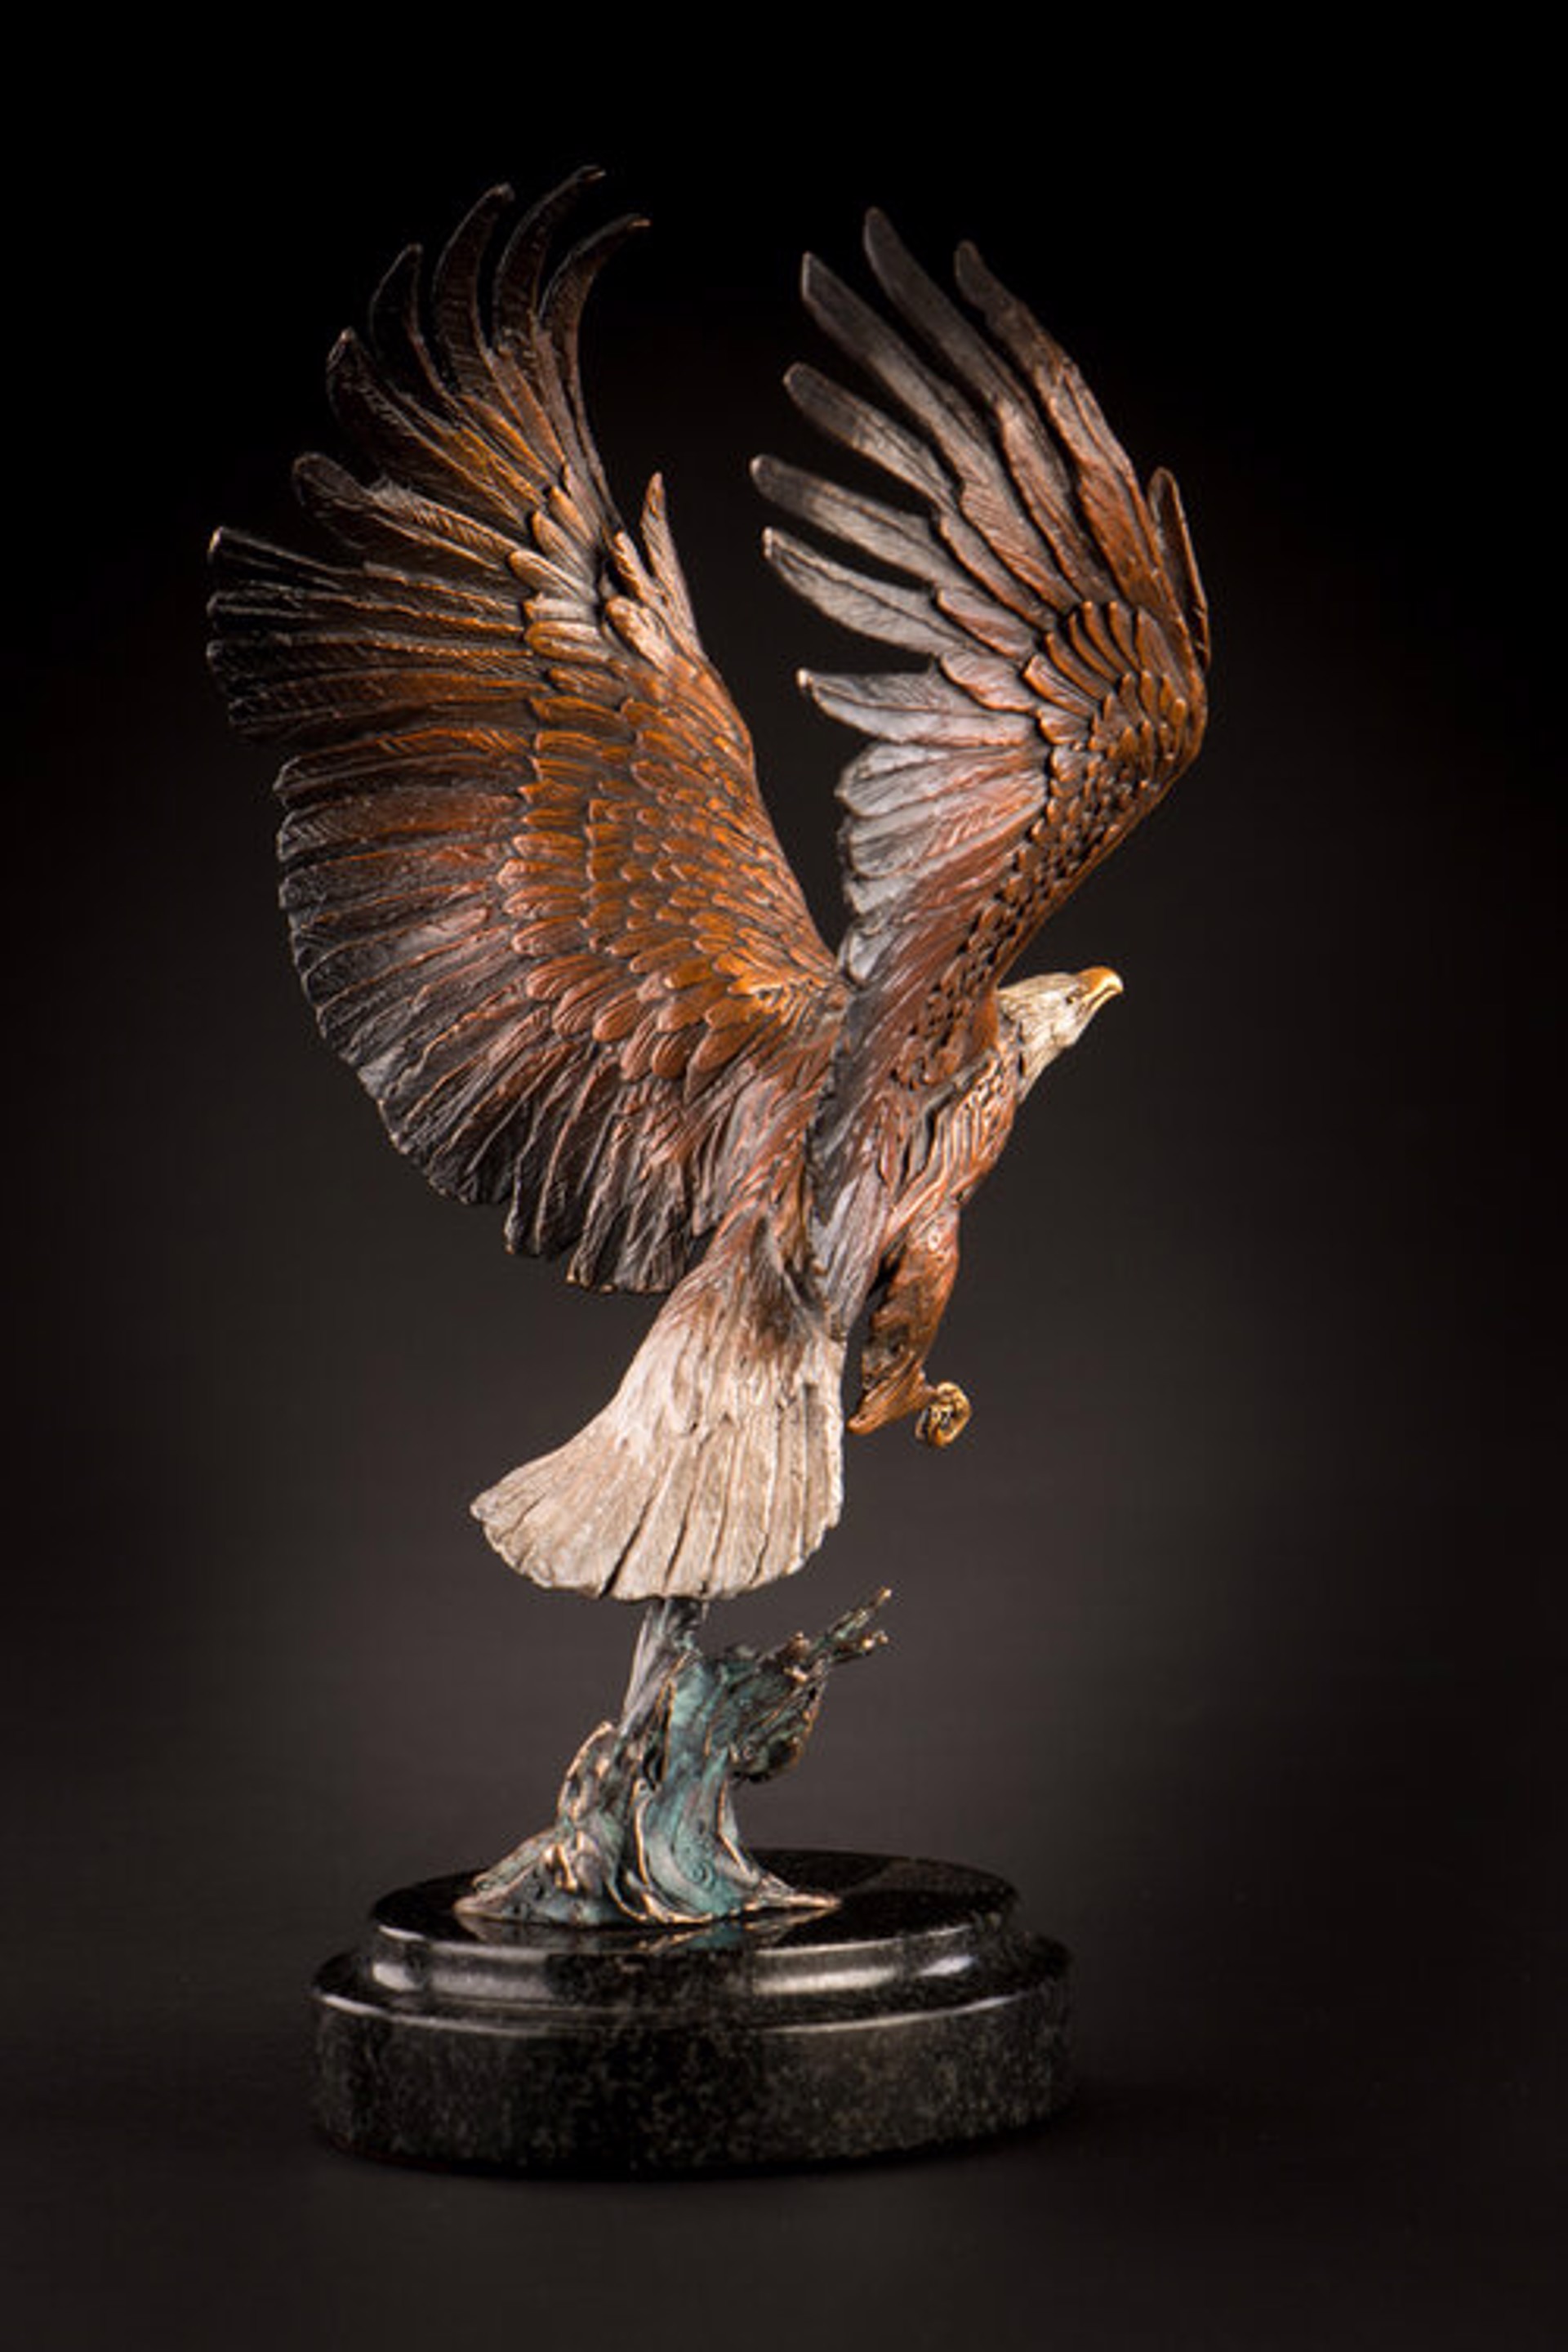 Fly Fishing (Maquette) (Edition of 99) by Ken Rowe